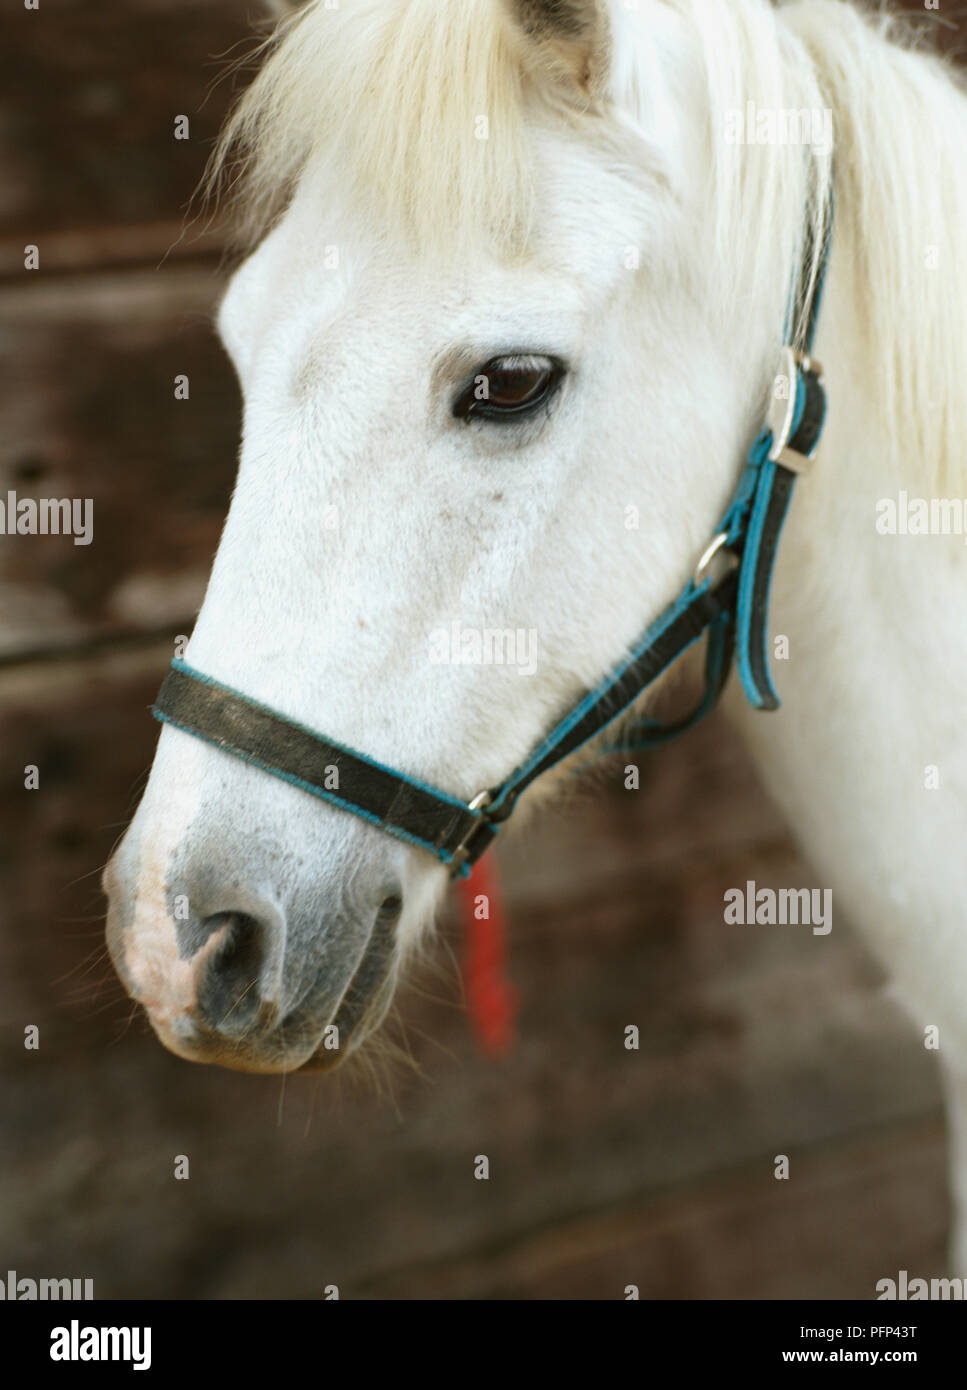 Grey horse, with white fur close up of head. Stock Photo